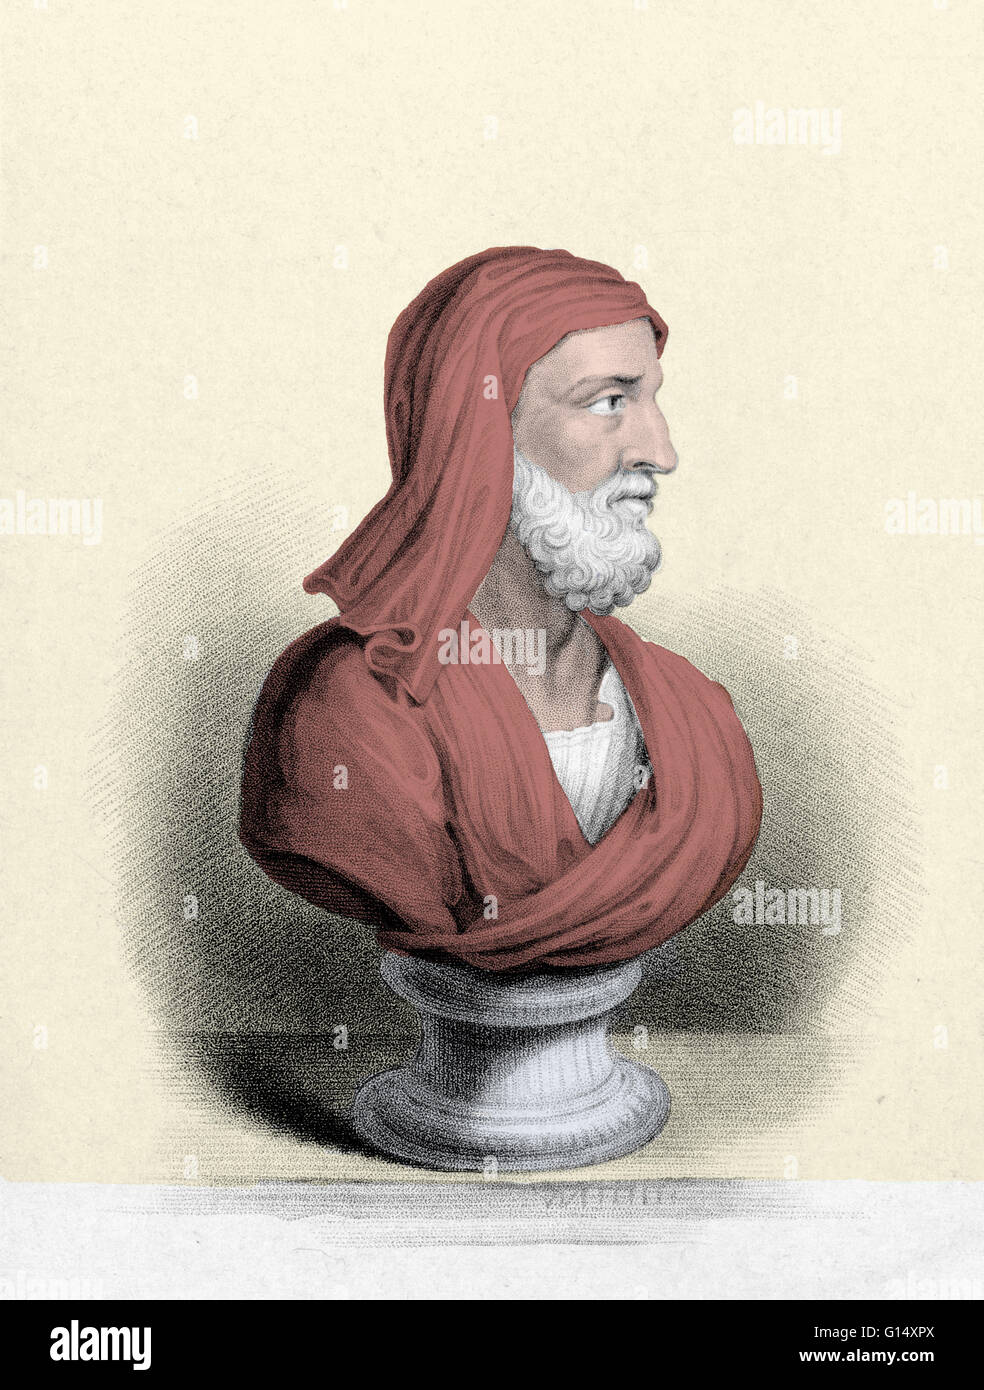 Lucius Mestrius Plutarchus (46-120 AD) was a Greek historian, biographer, essayist, and Middle Platonist known primarily for his Parallel Lives and Moralia. In addition to his duties as a priest of the Delphic temple, Plutarch was also a magistrate in Cha Stock Photo